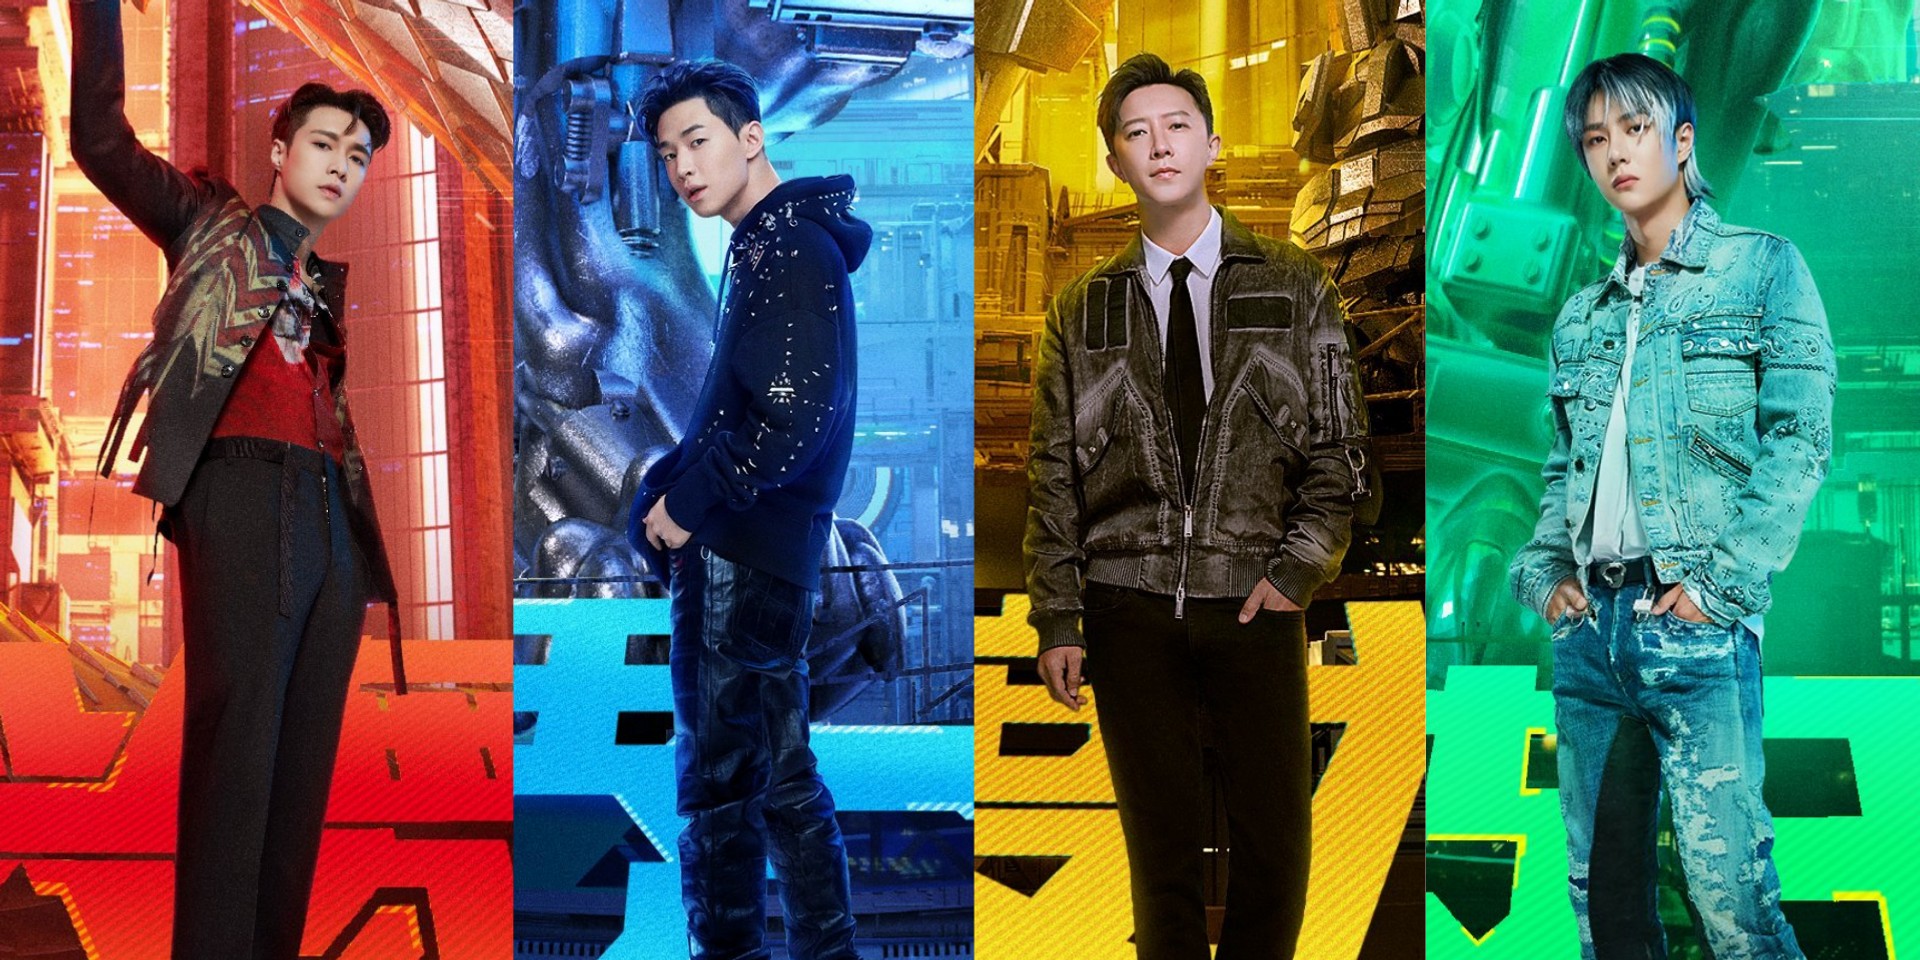 Wang Yibo, Han Geng, Henry Lau, and Lay Zhang reveal what to expect for Street Dance of China Season 4 - watch